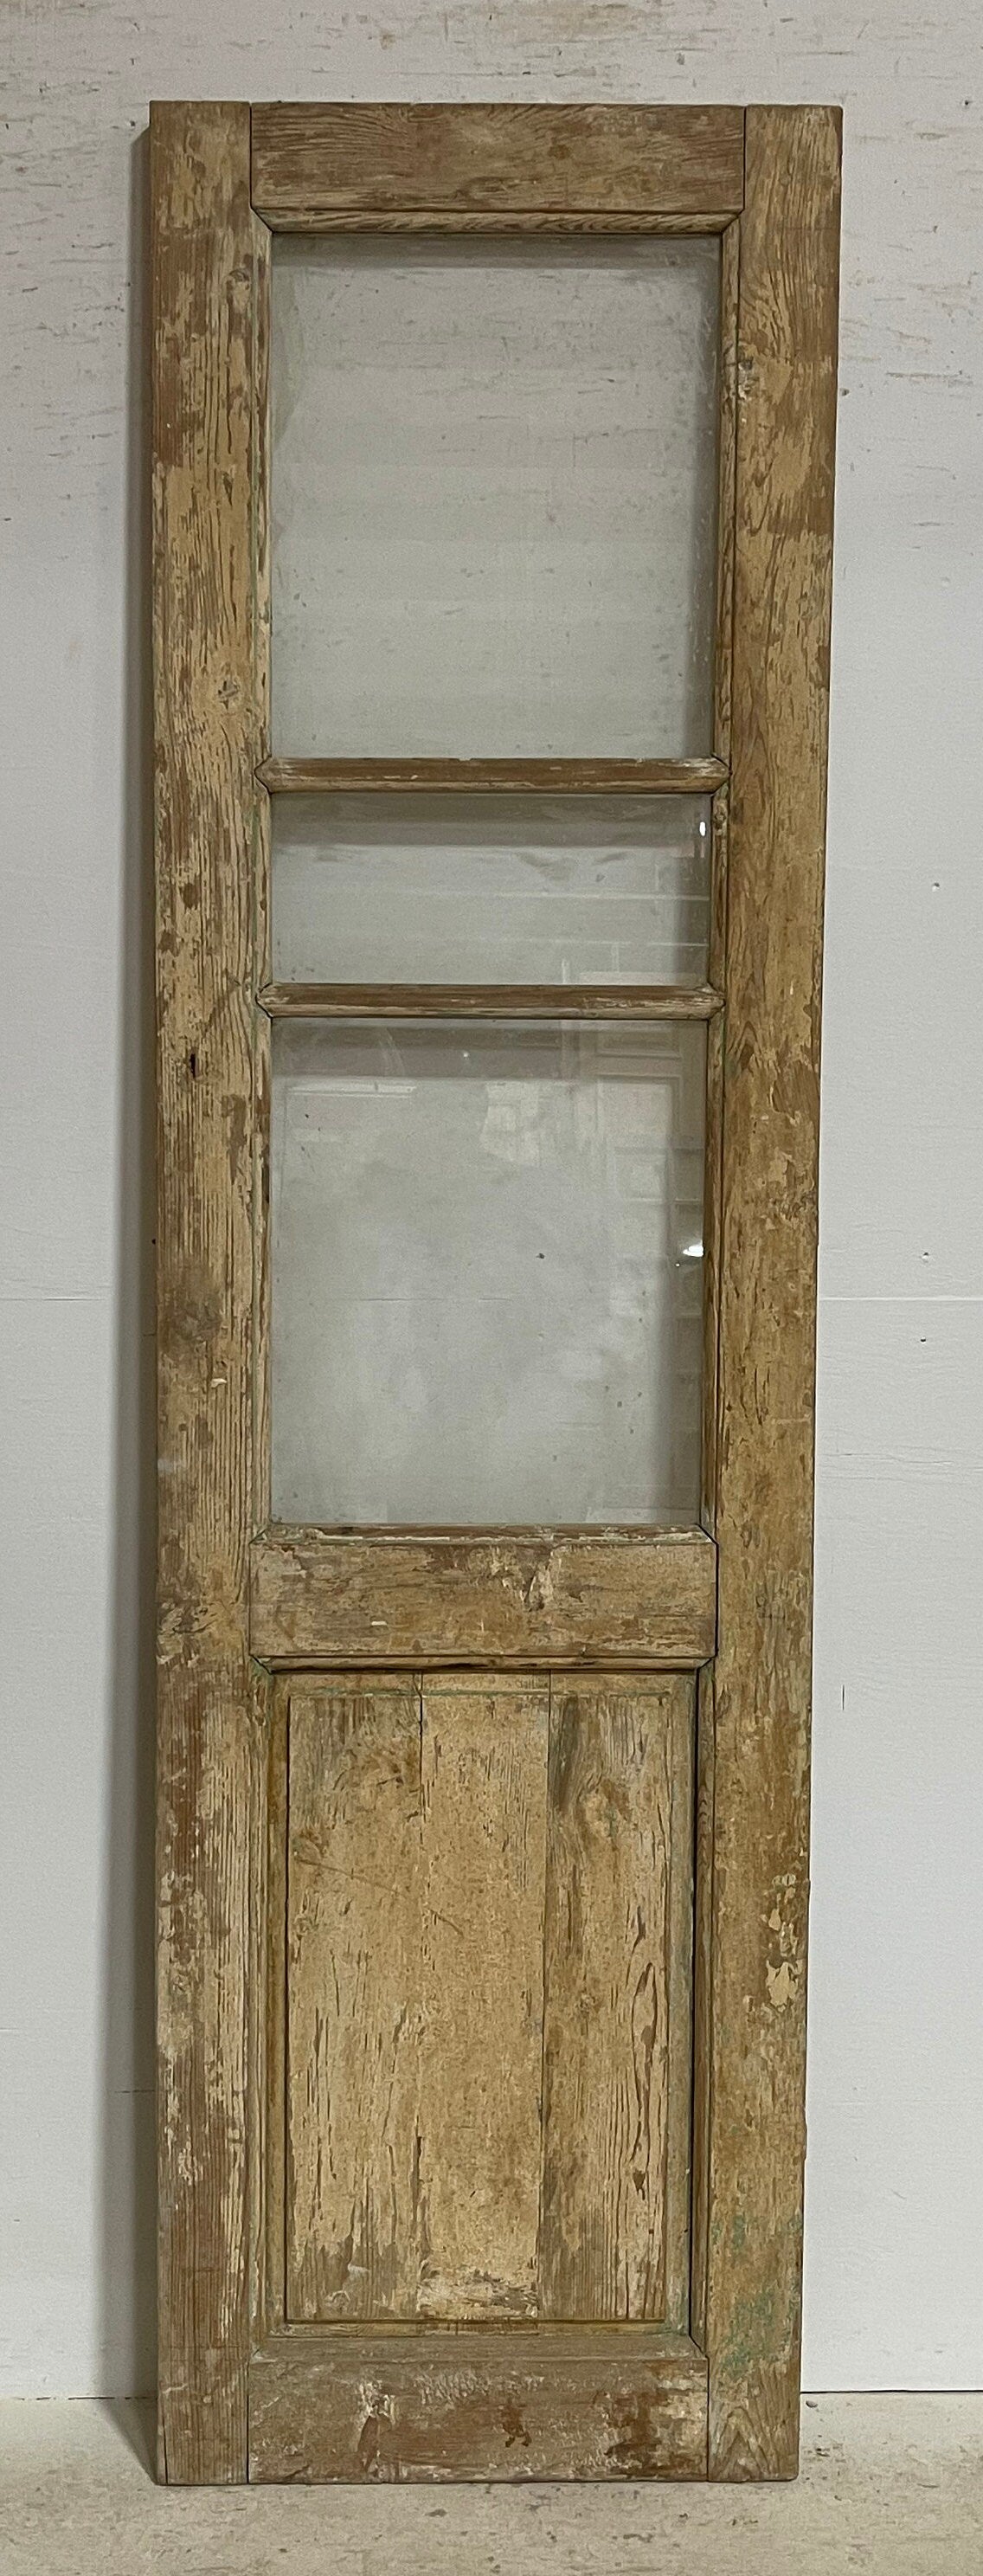 Antique French panel door with glass (94.75x26.5) G1494s